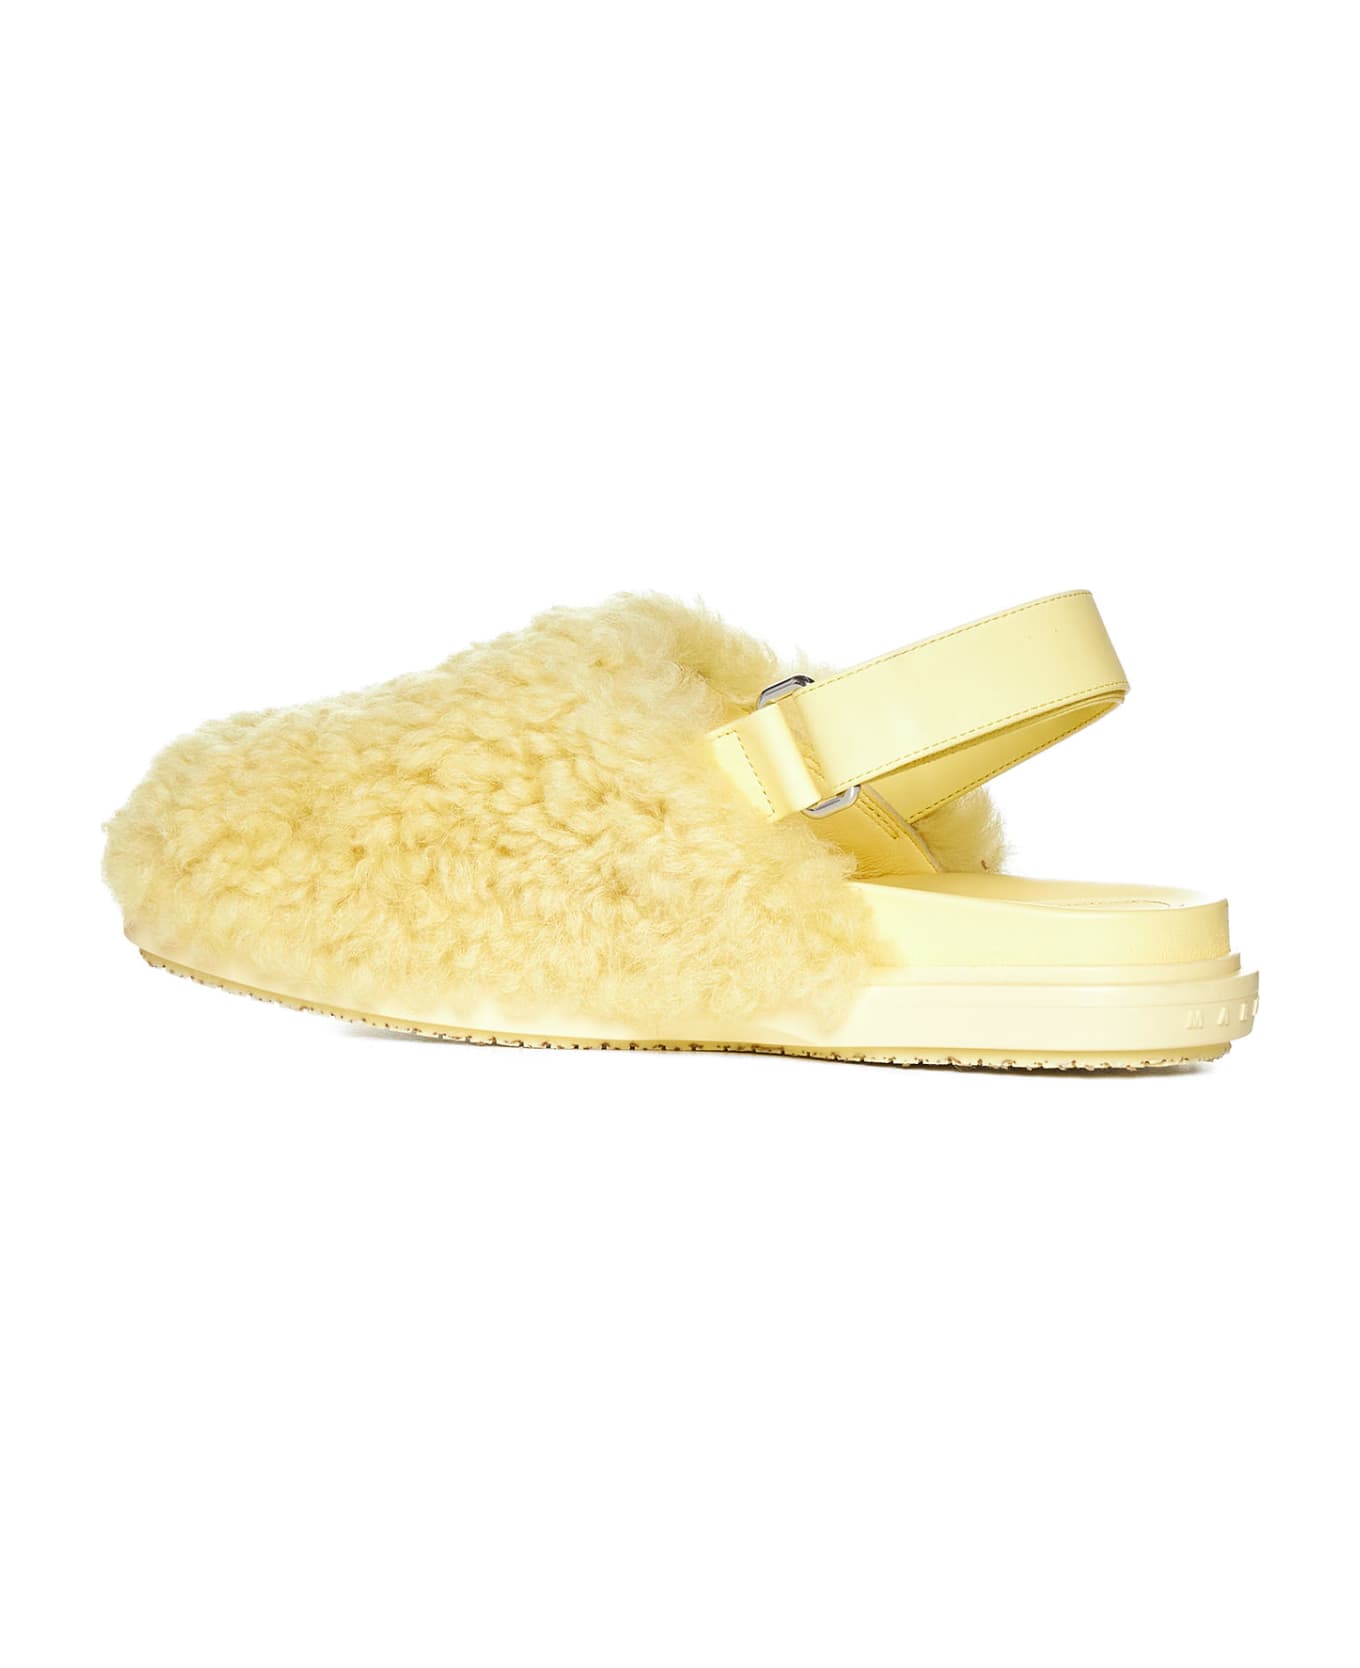 Marni Slipper With Fur And Adjustable Strap - Pineapple